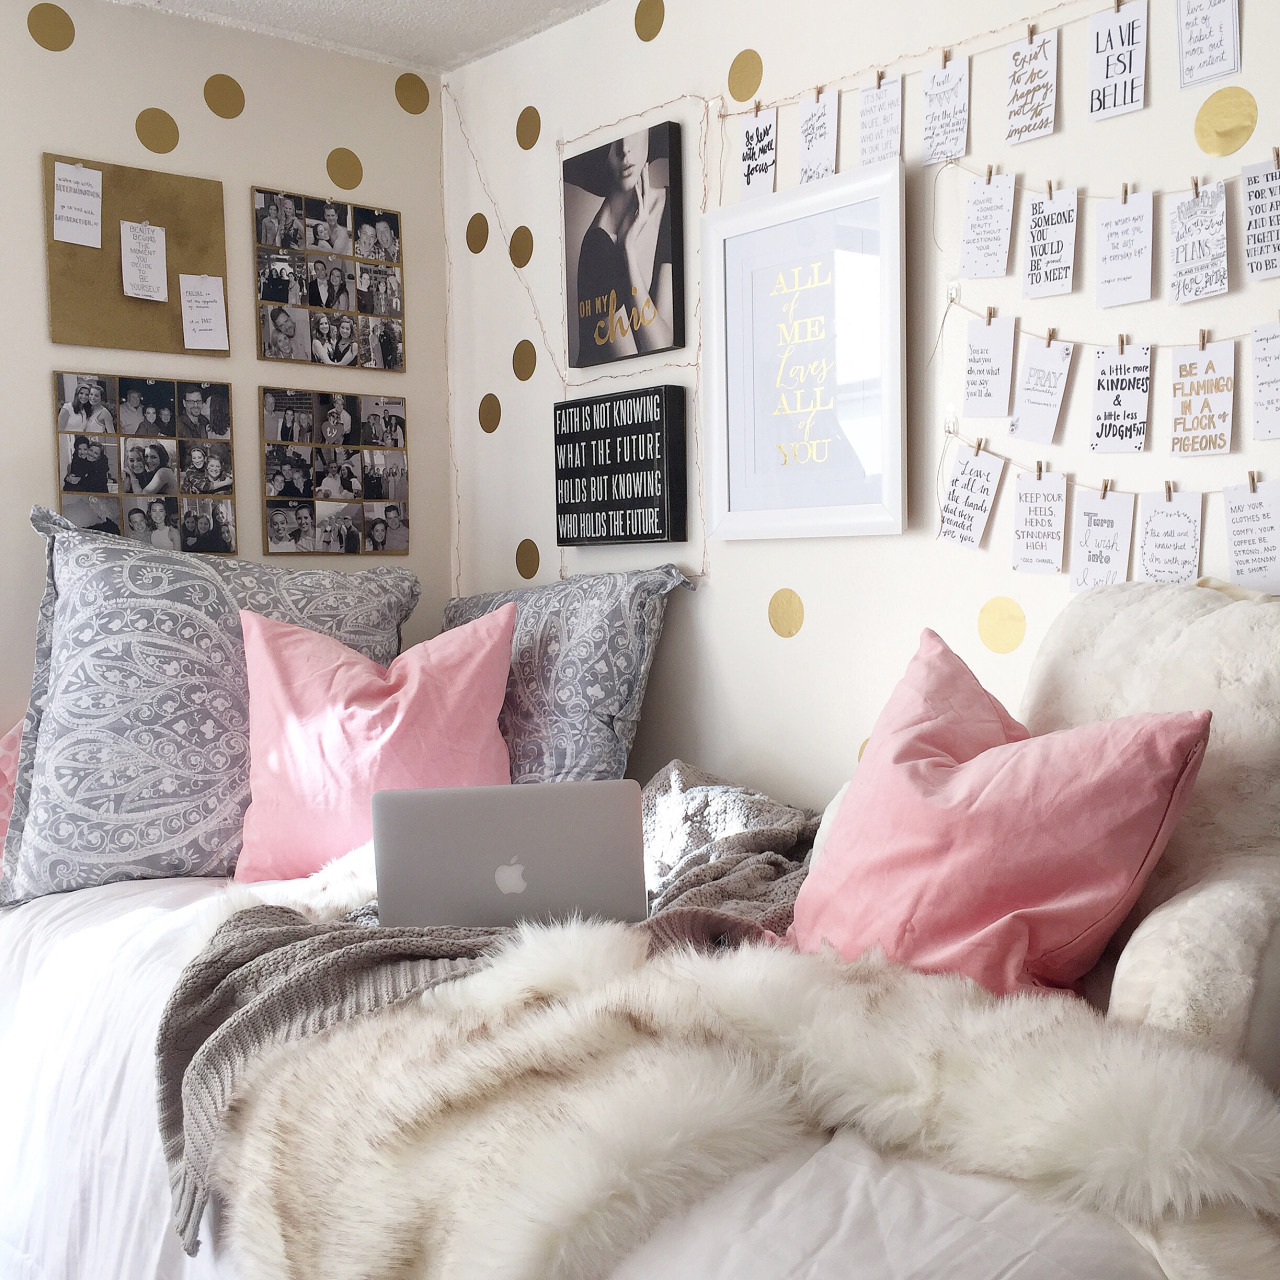 Inspiration From 10 Super Stylish Real Dorm Rooms